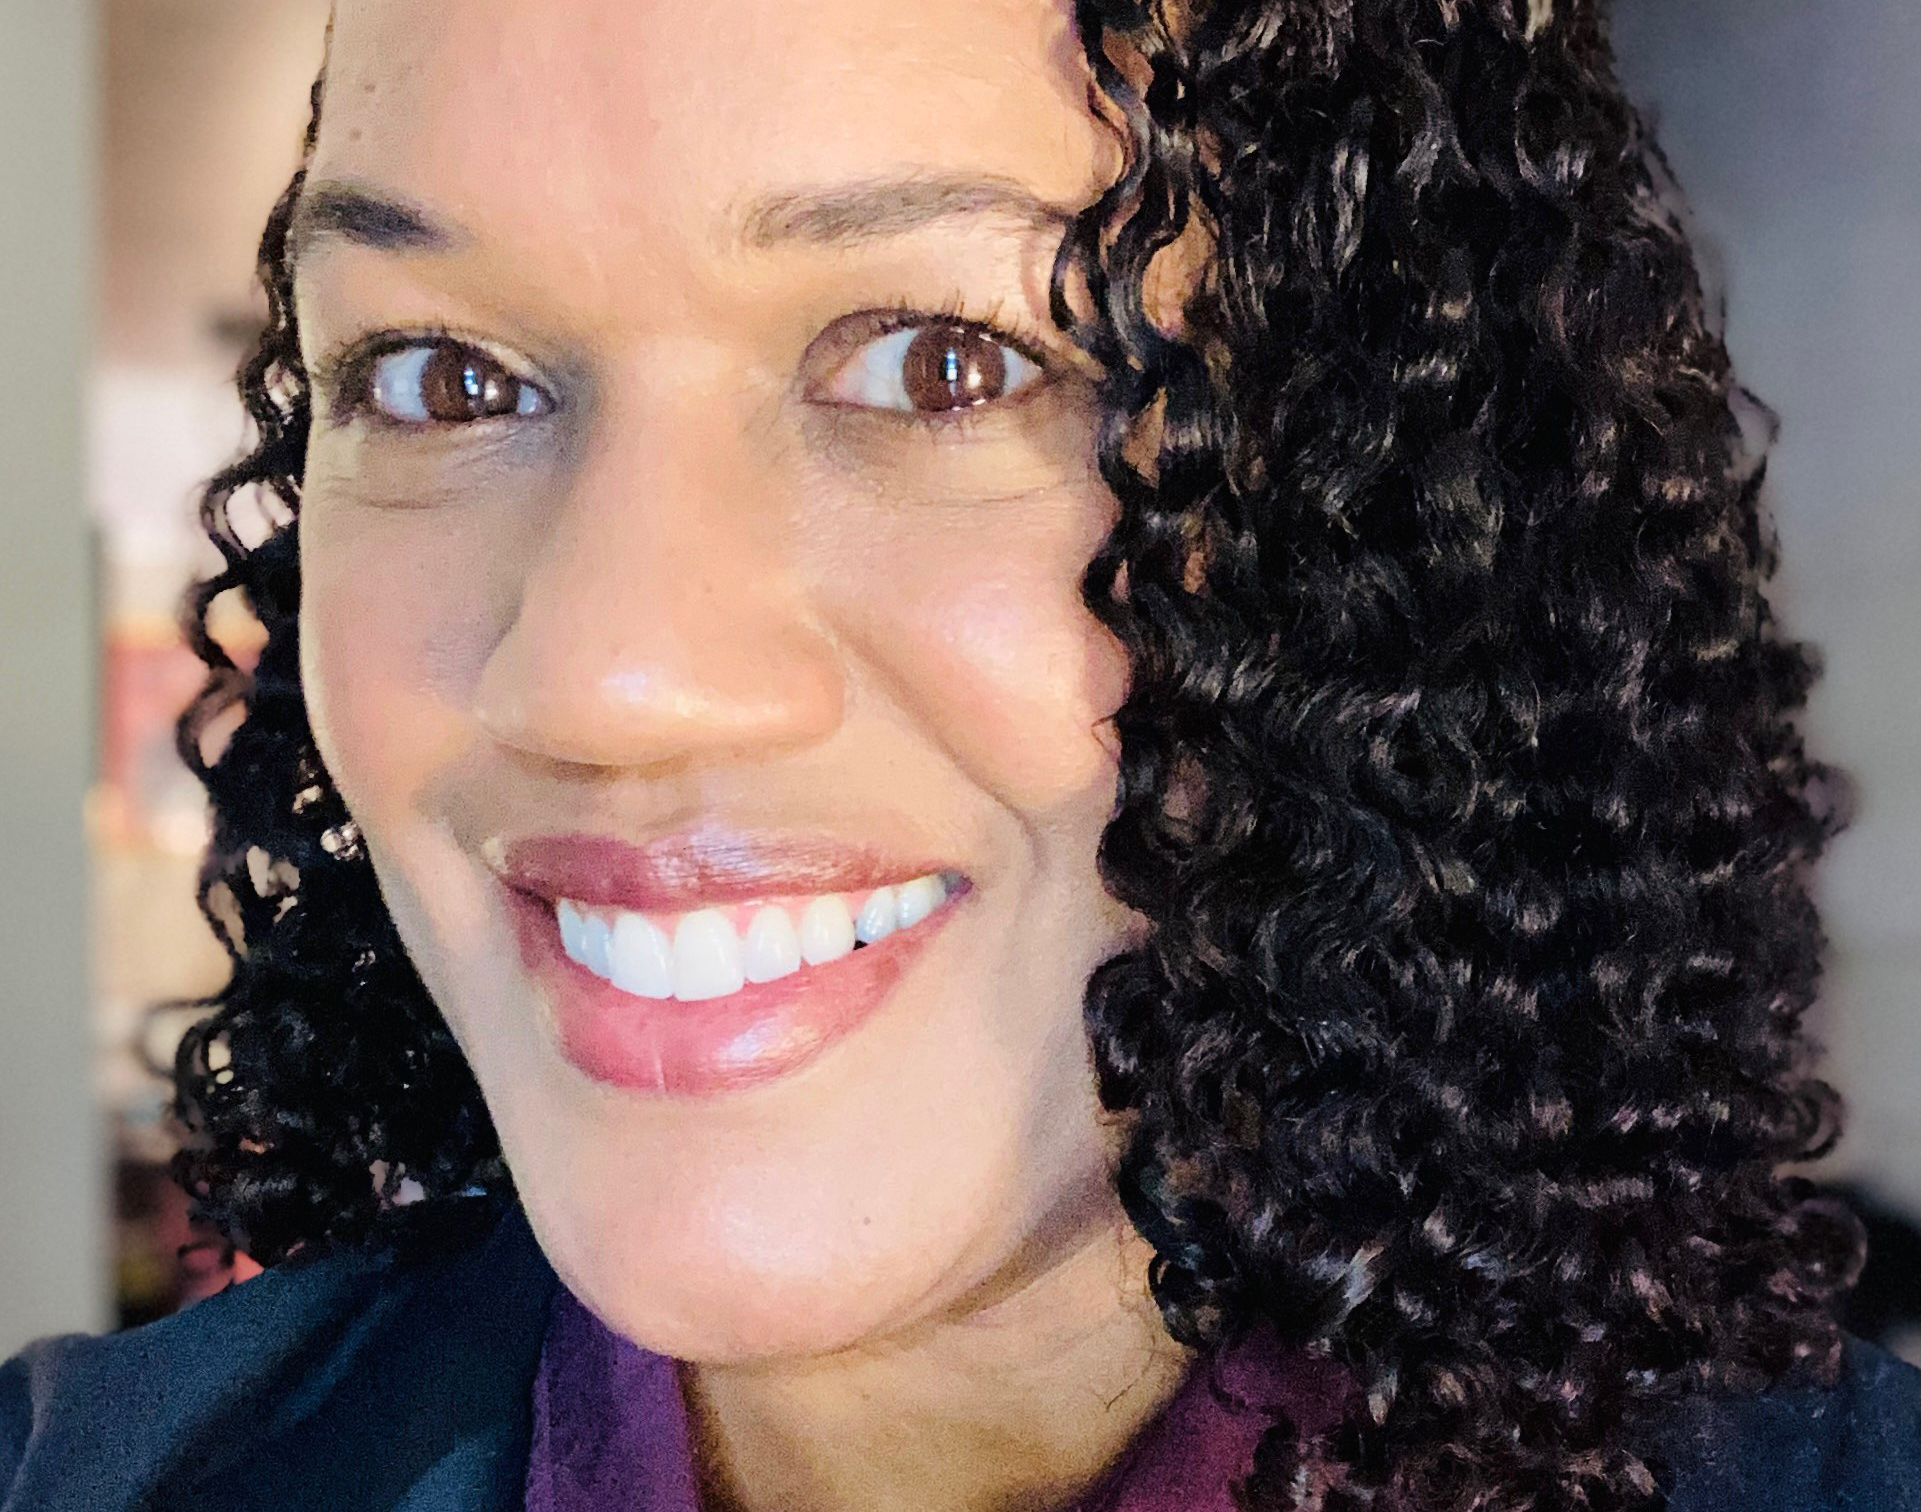 A Black woman with dark curly hair is smiling with her face close to the camera.